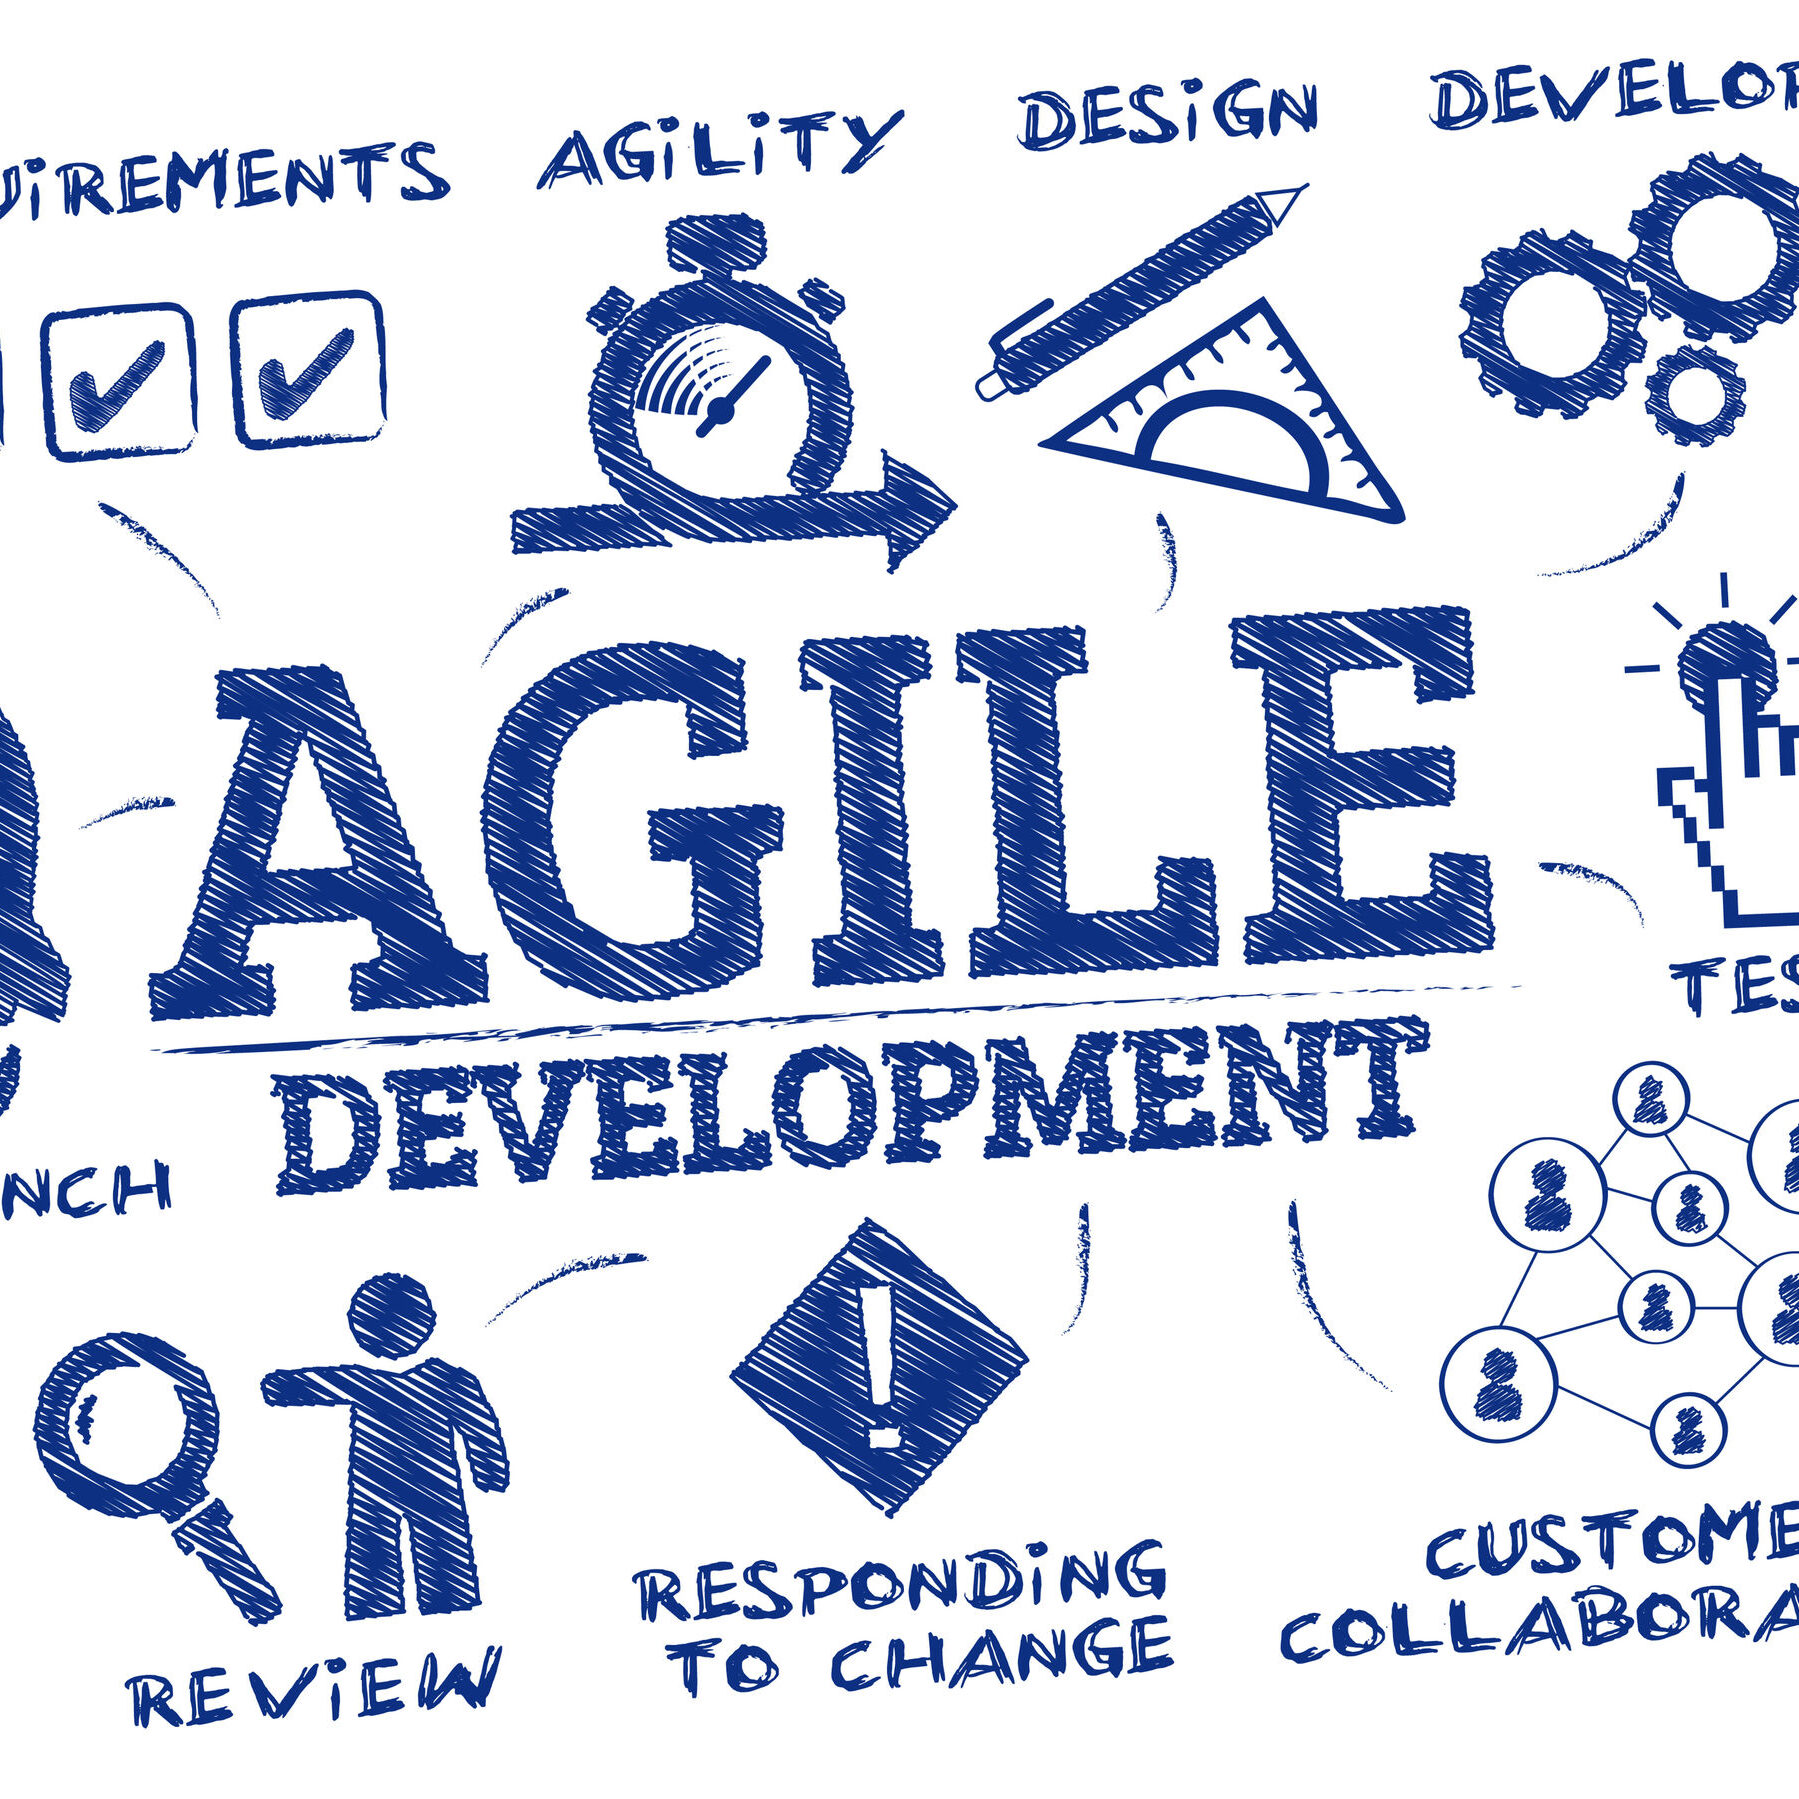 agile development. Chart with keywords and icons